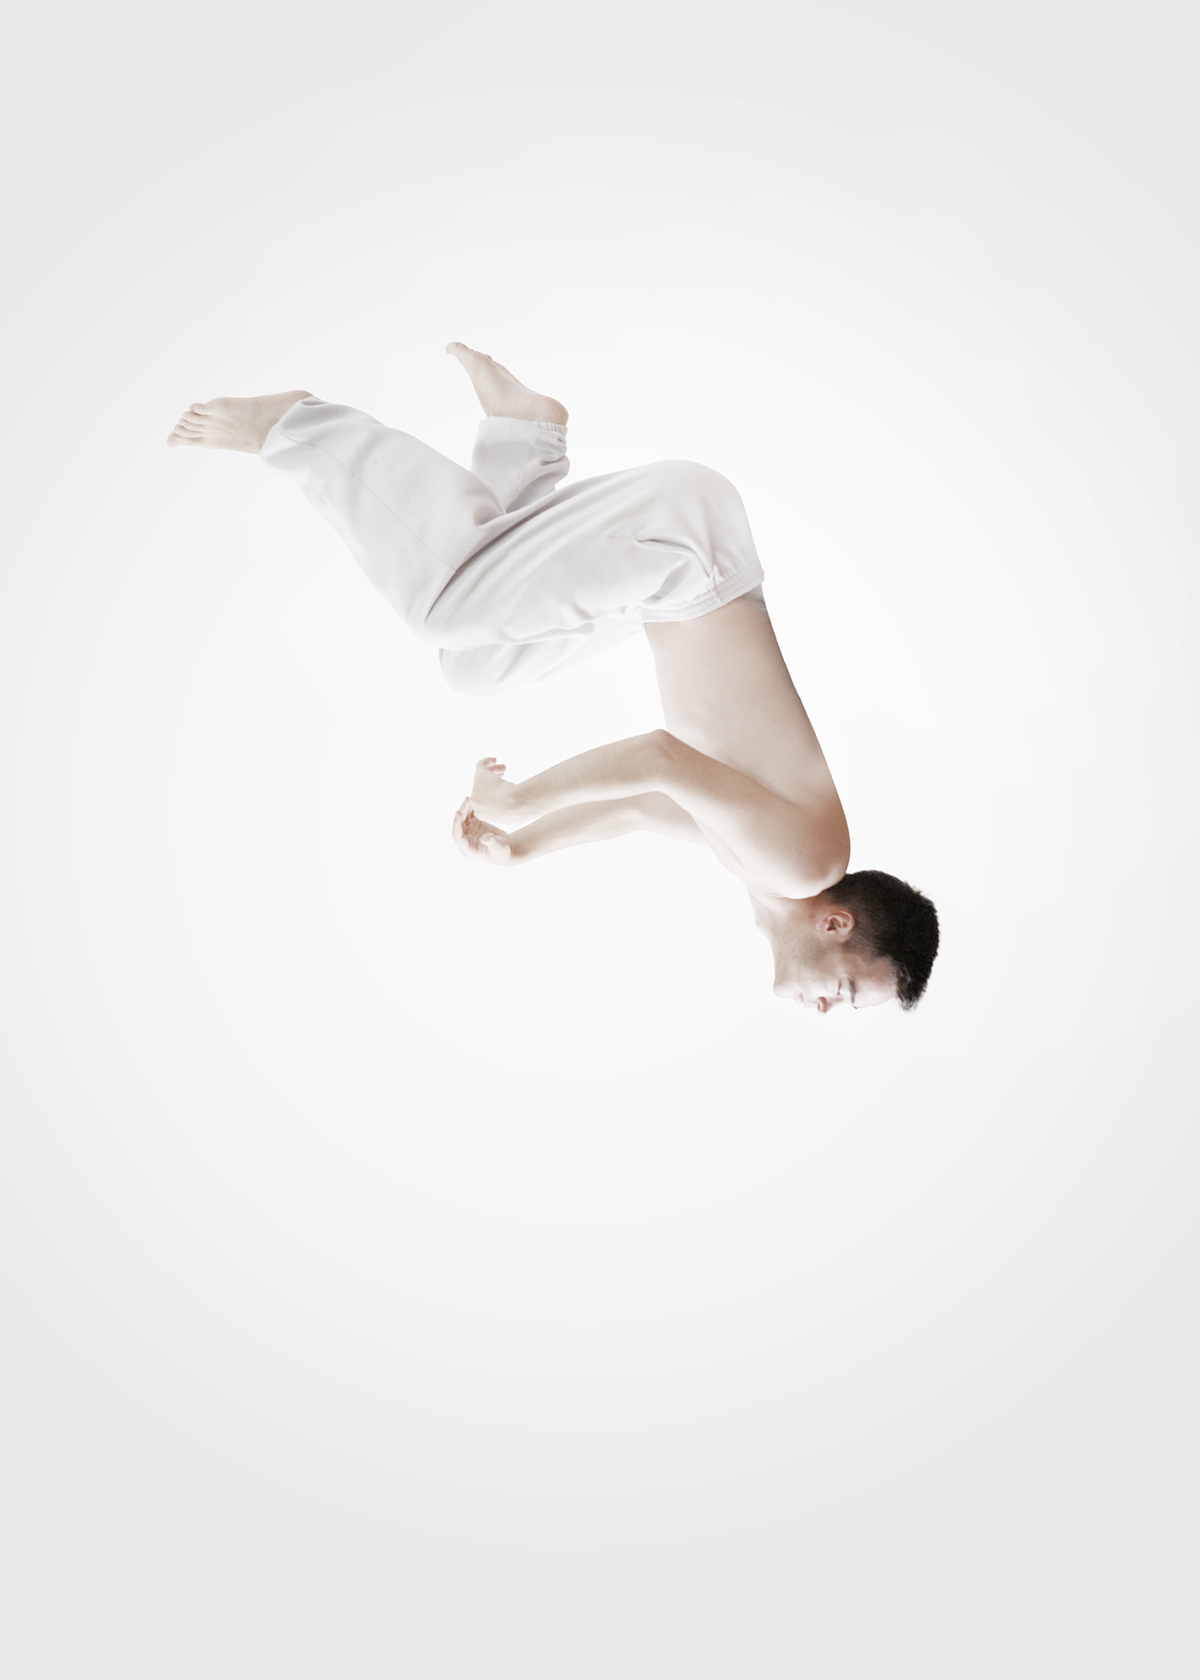 floating  gravity Isolated humans White smooth levitation lebeges dreams art